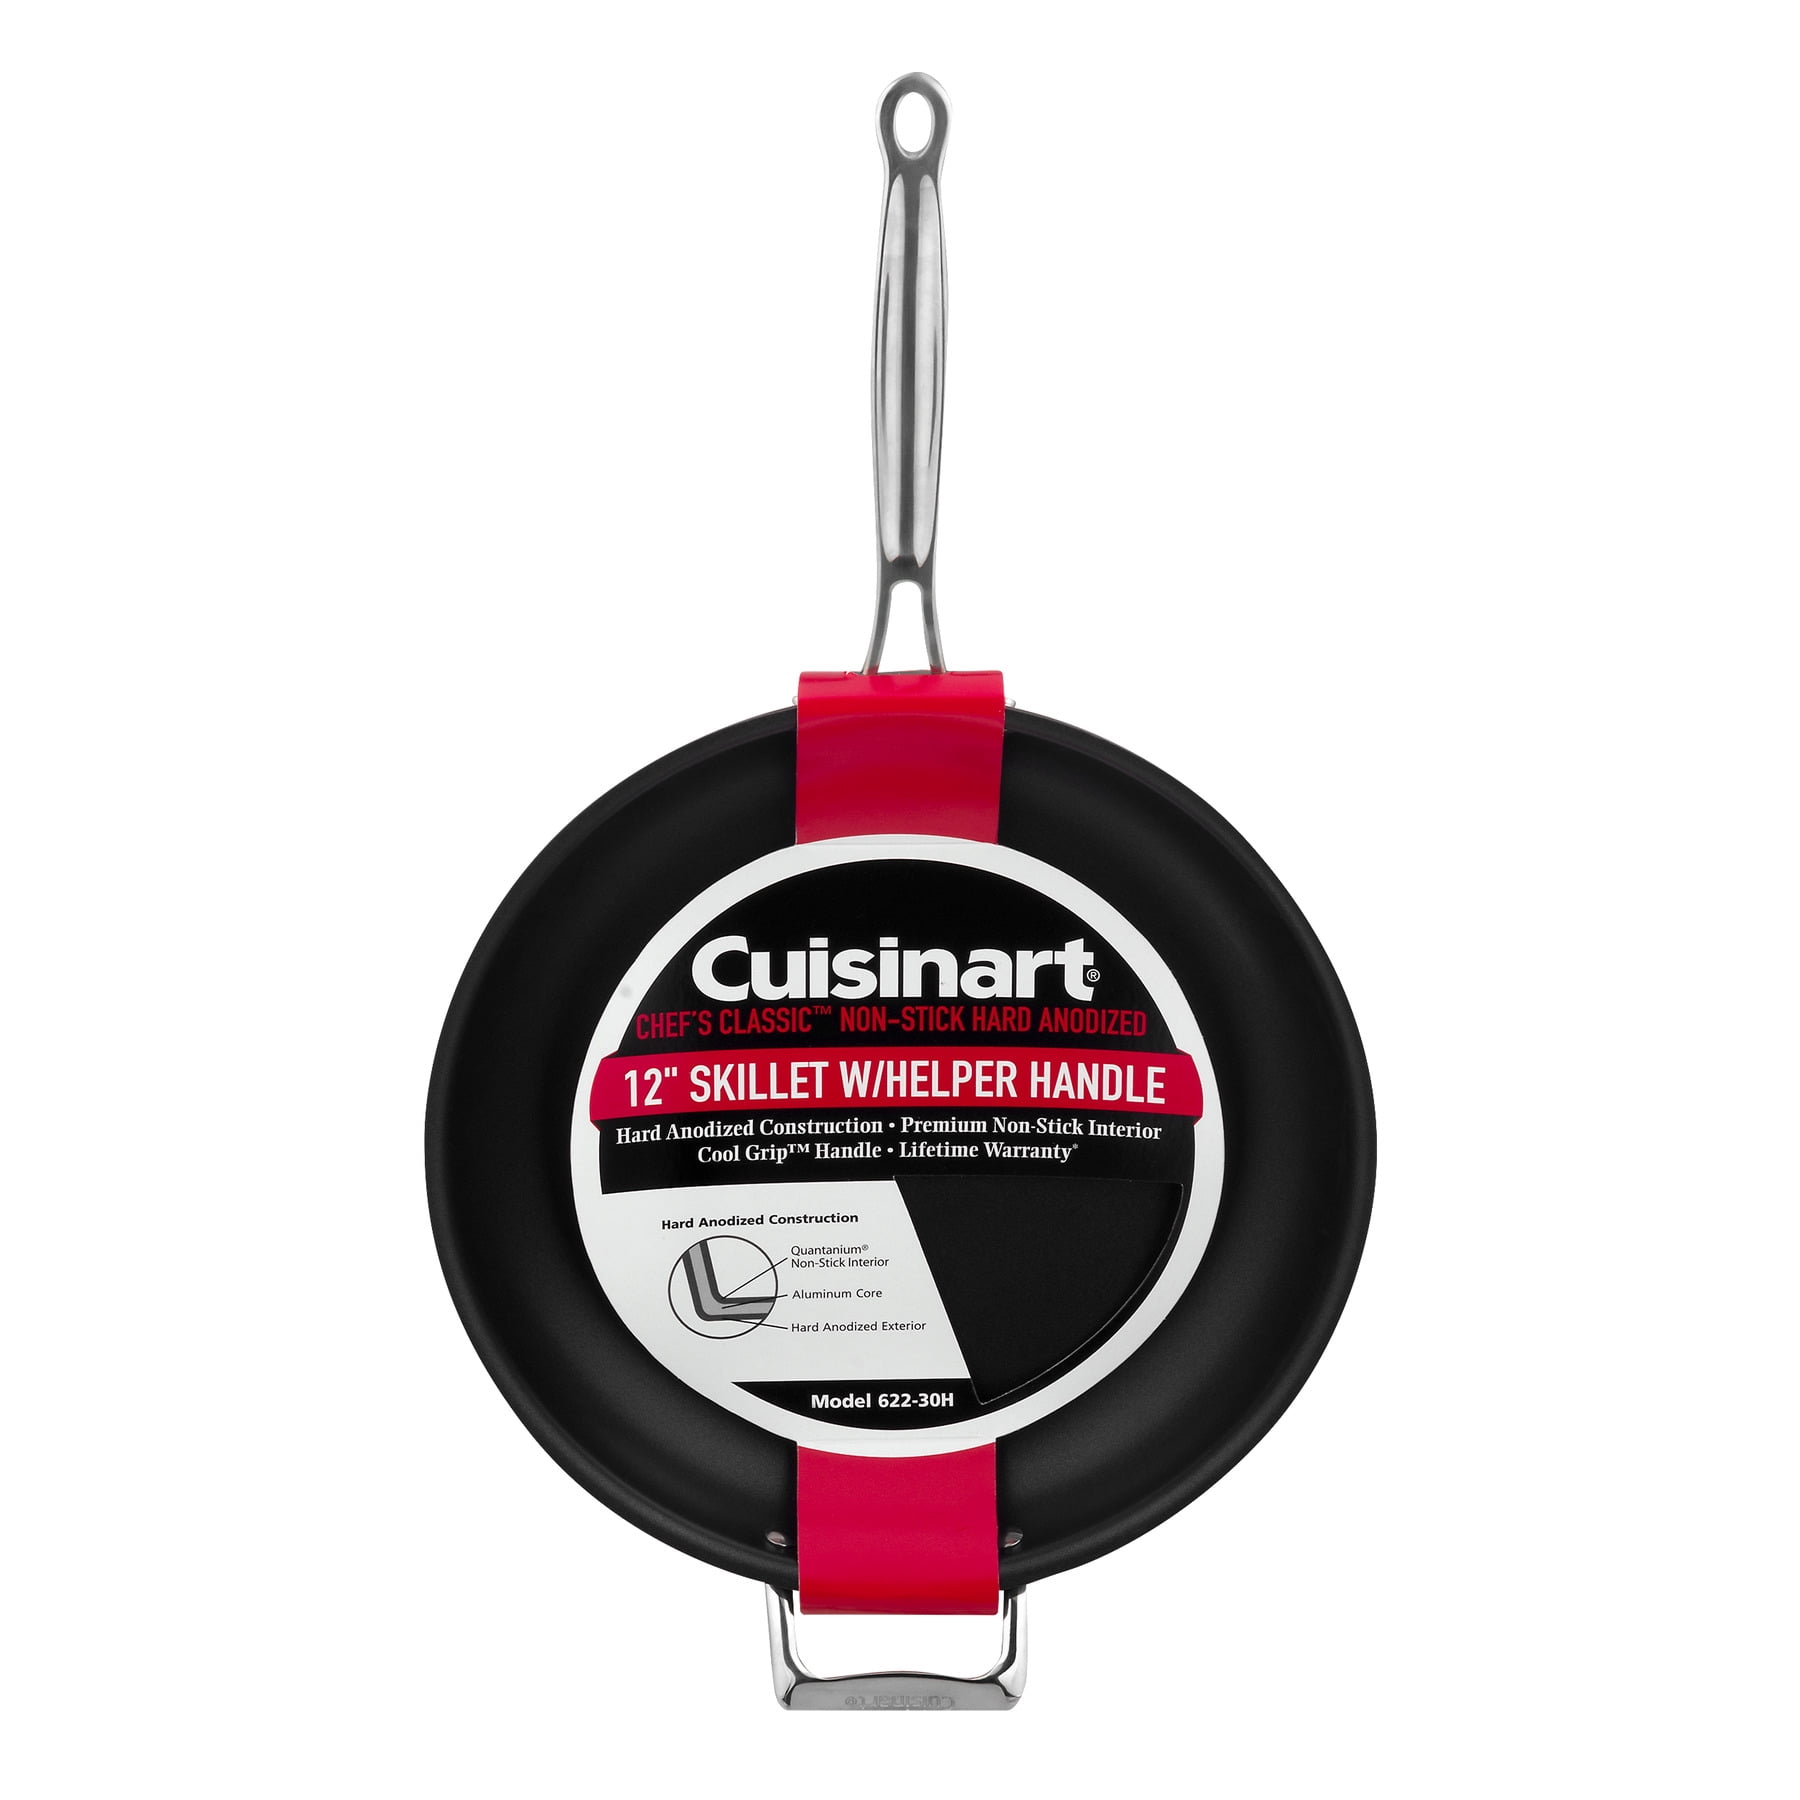 Cuisinart Chef's Classic Stainless 12-inch Open Skillet - 7198855